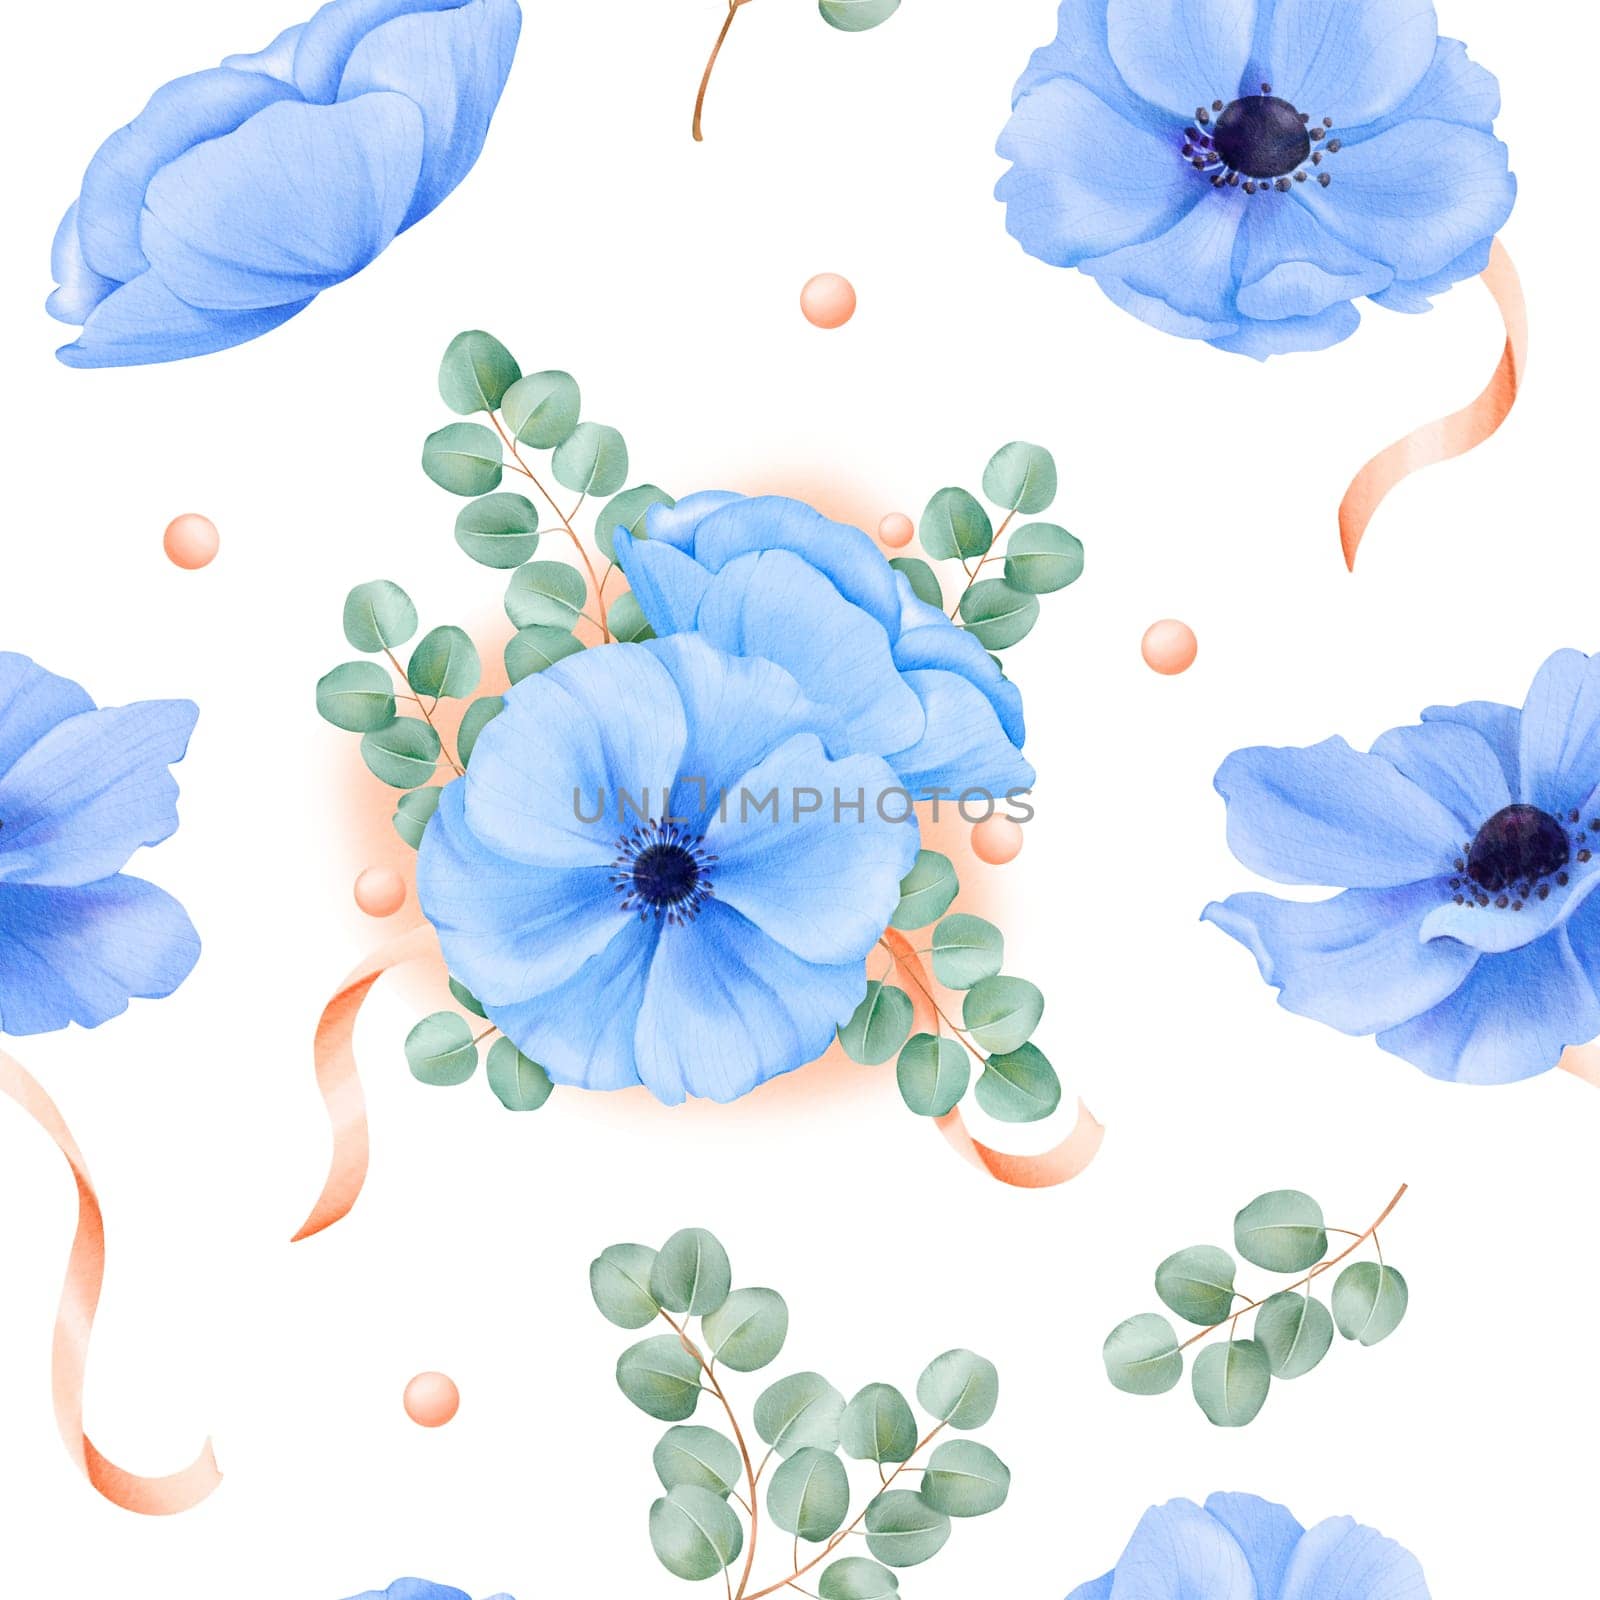 A seamless pattern watercolor floral. blue anemones, satin ribbons, sparkling rhinestones eucalyptus leaves. for fabric prints, digital wallpapers, stationery designs, and decorative artworks by Art_Mari_Ka